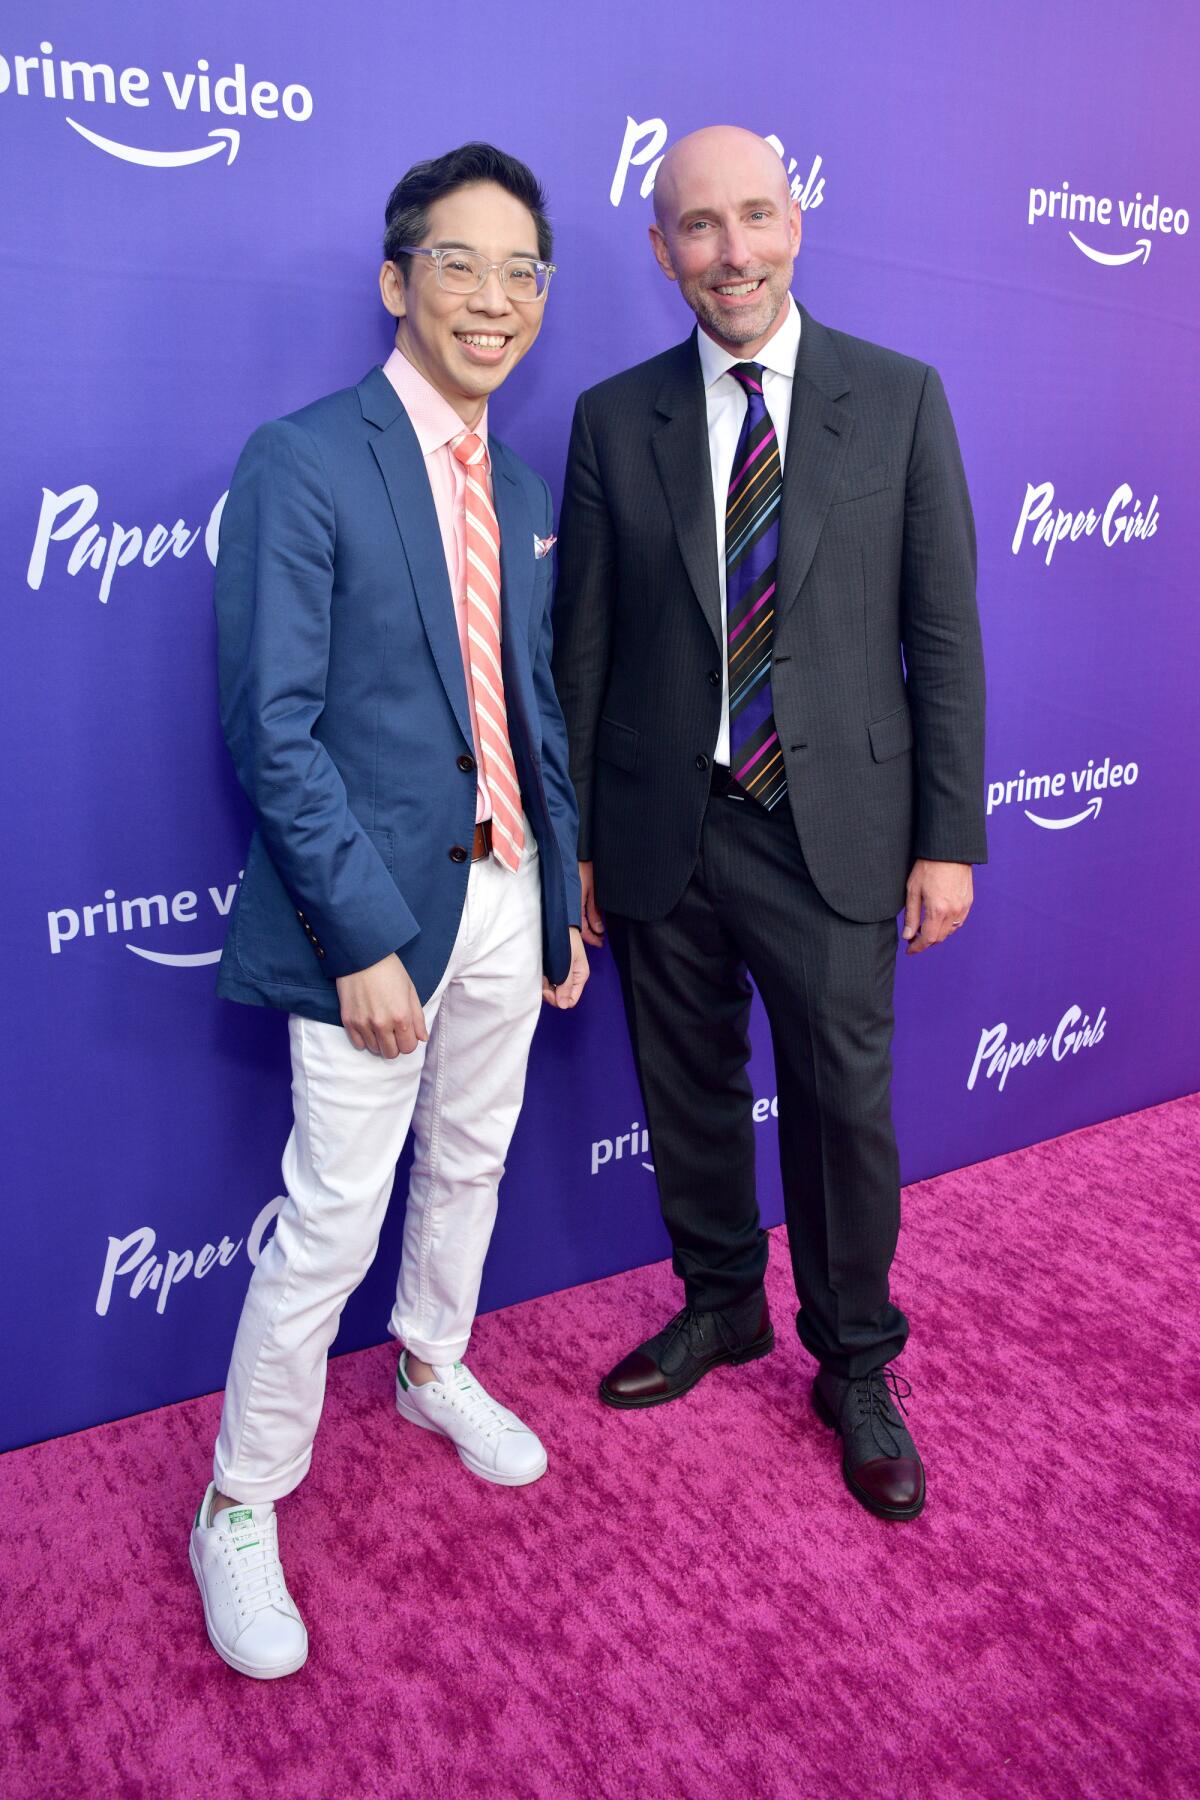 two men wearing suits on a red carpet